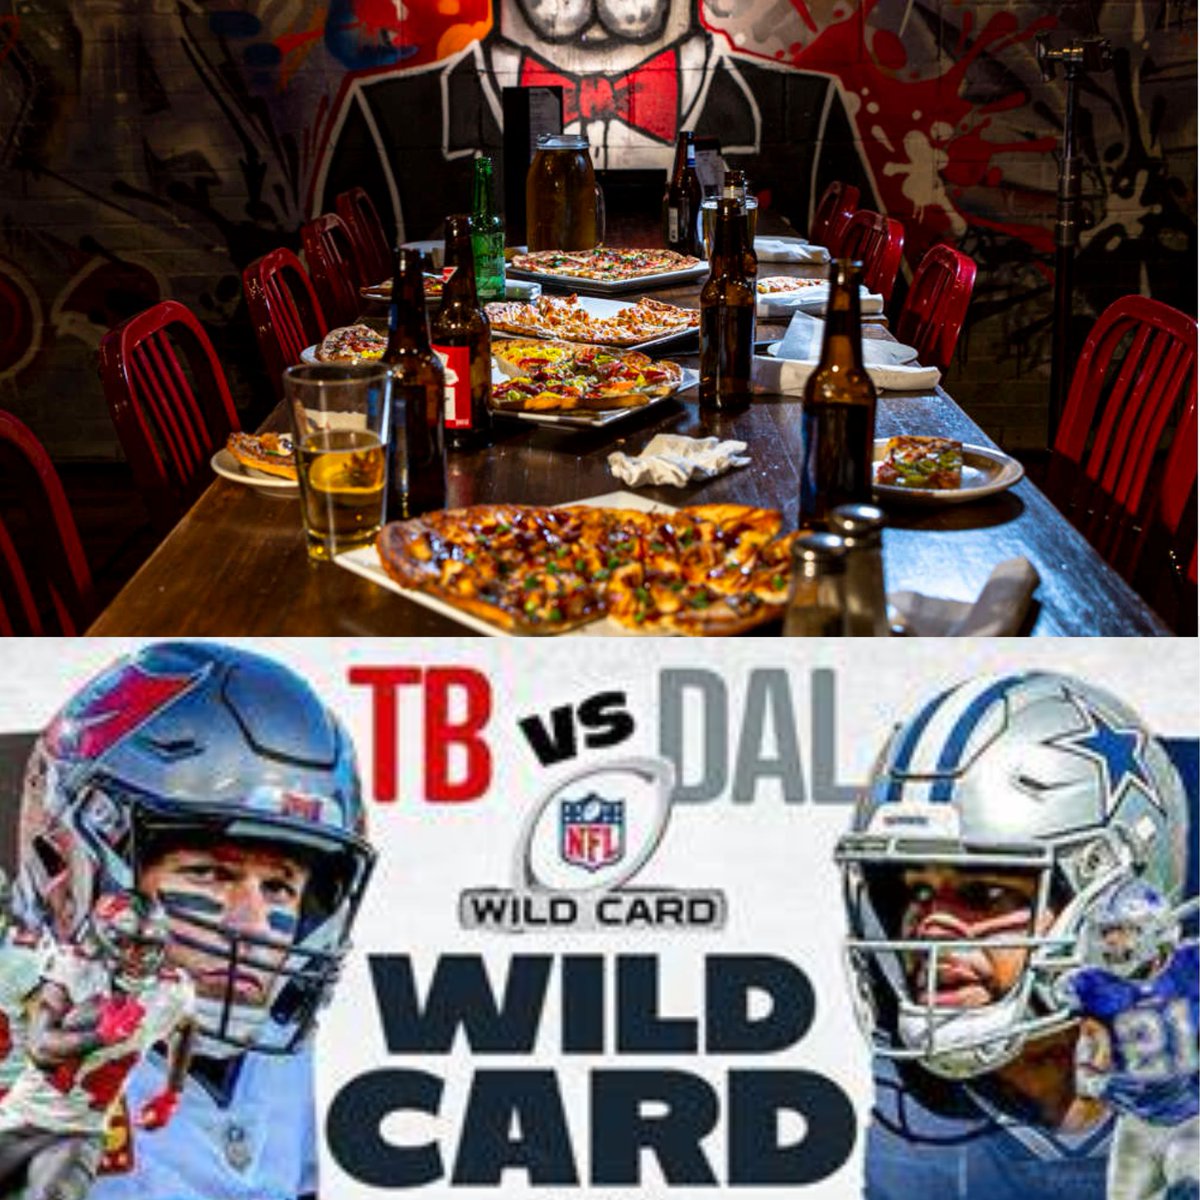 GAME DAY FEELS WITH HALF PRICE PIZZA!! 🏈🍺🍕
HAPPY HOUR DEALS 3-6pm & 9-11pm~ FULL MENU-11pm!

#gamedayfeels #dailydeals #happyhours #wildcardplayoff #mondaynightfootball #pvdeats #pvddrinks #401eats #sportsbars #socialtimes #ladder133kitchenandsocial